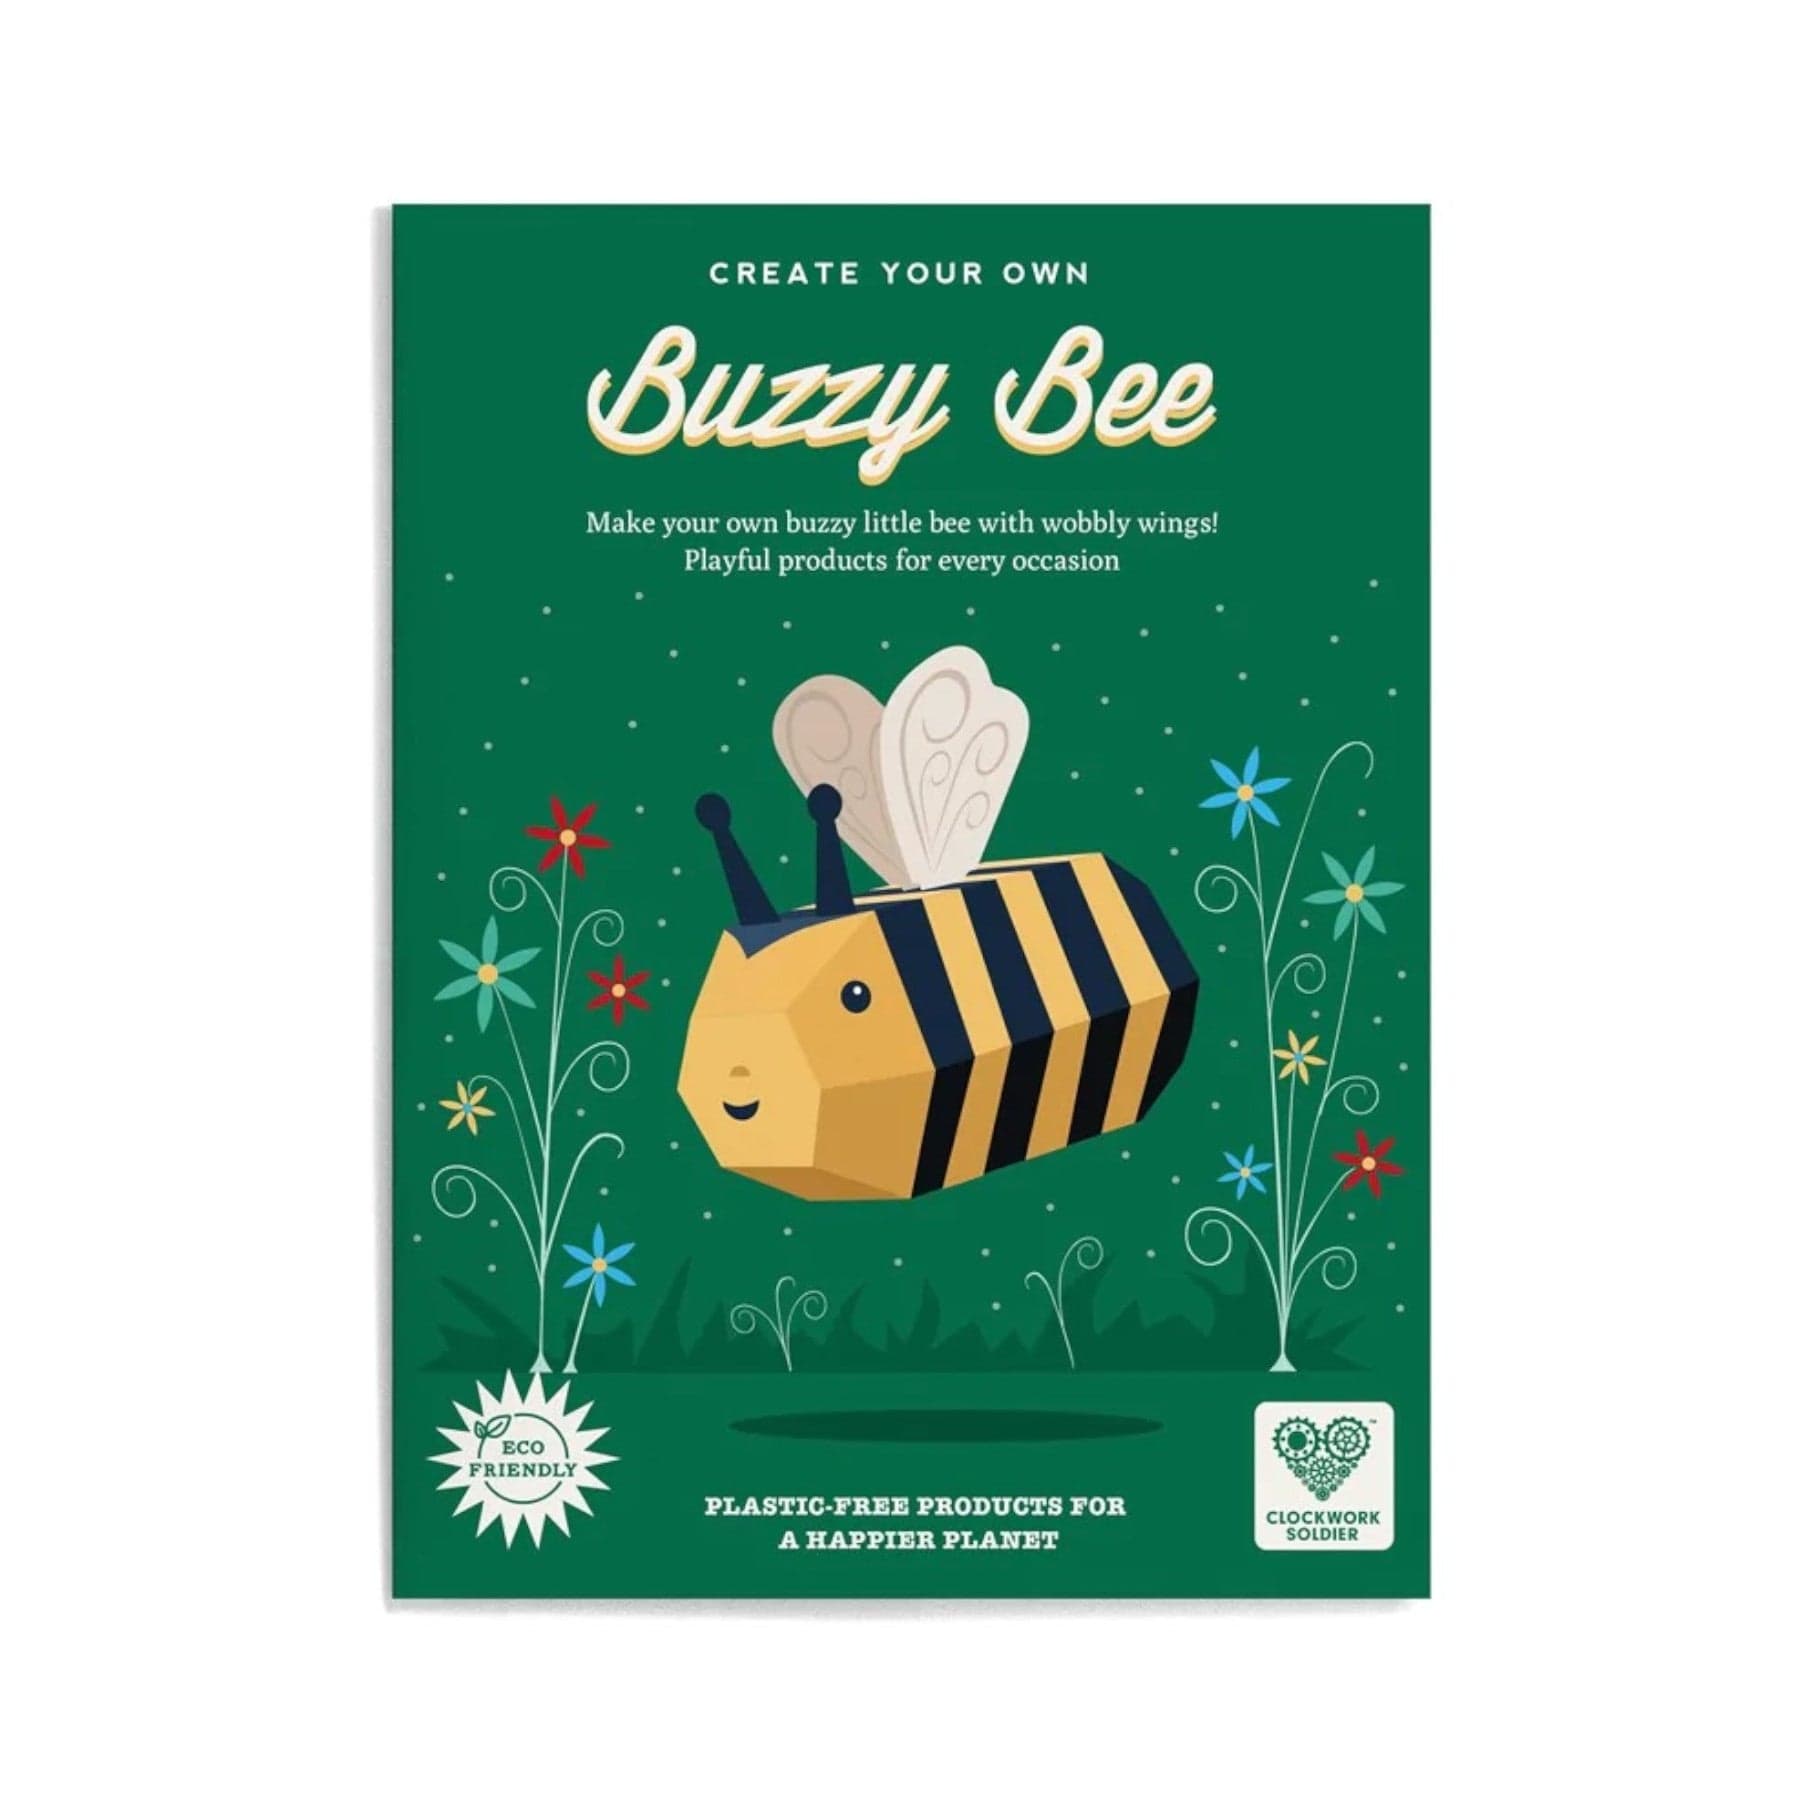 Eco-friendly Buzzy Bee book cover with cartoon bee and playful design advocating plastic-free products for environmental sustainability.